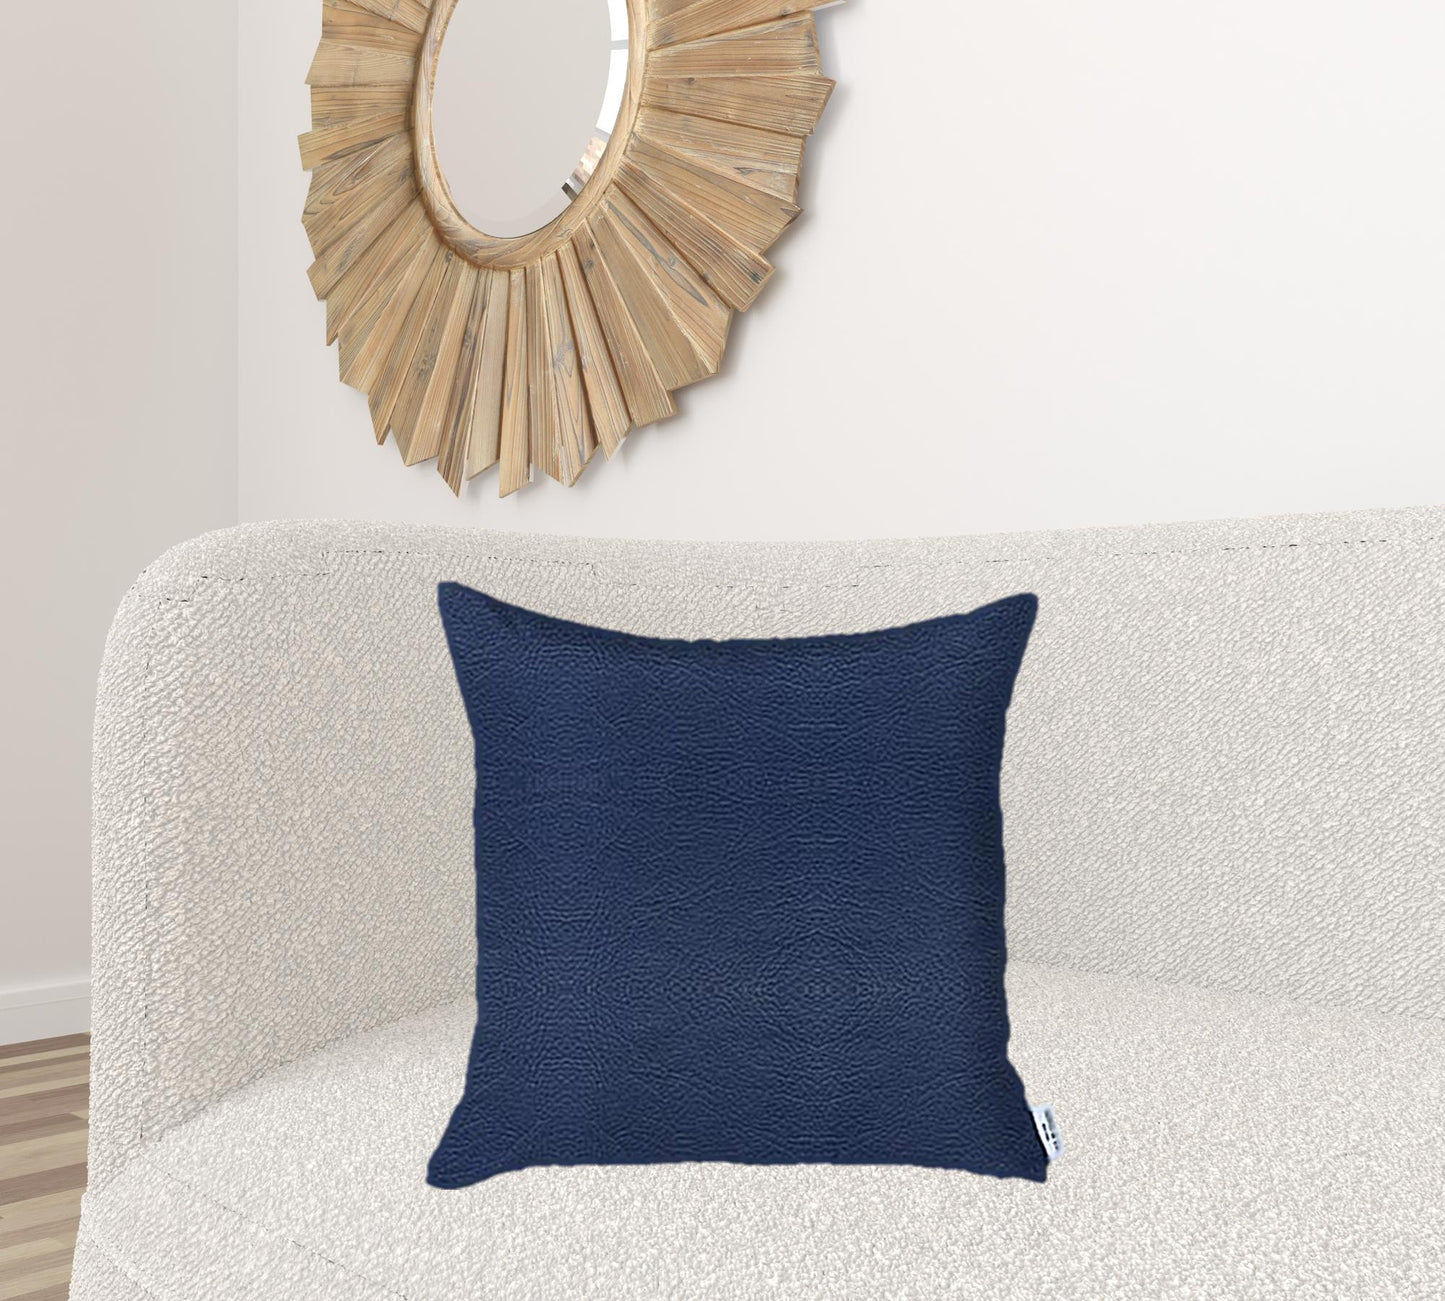 22" X 22" Navy Blue Solid Color Handmade Faux Leather Throw Pillow Cover